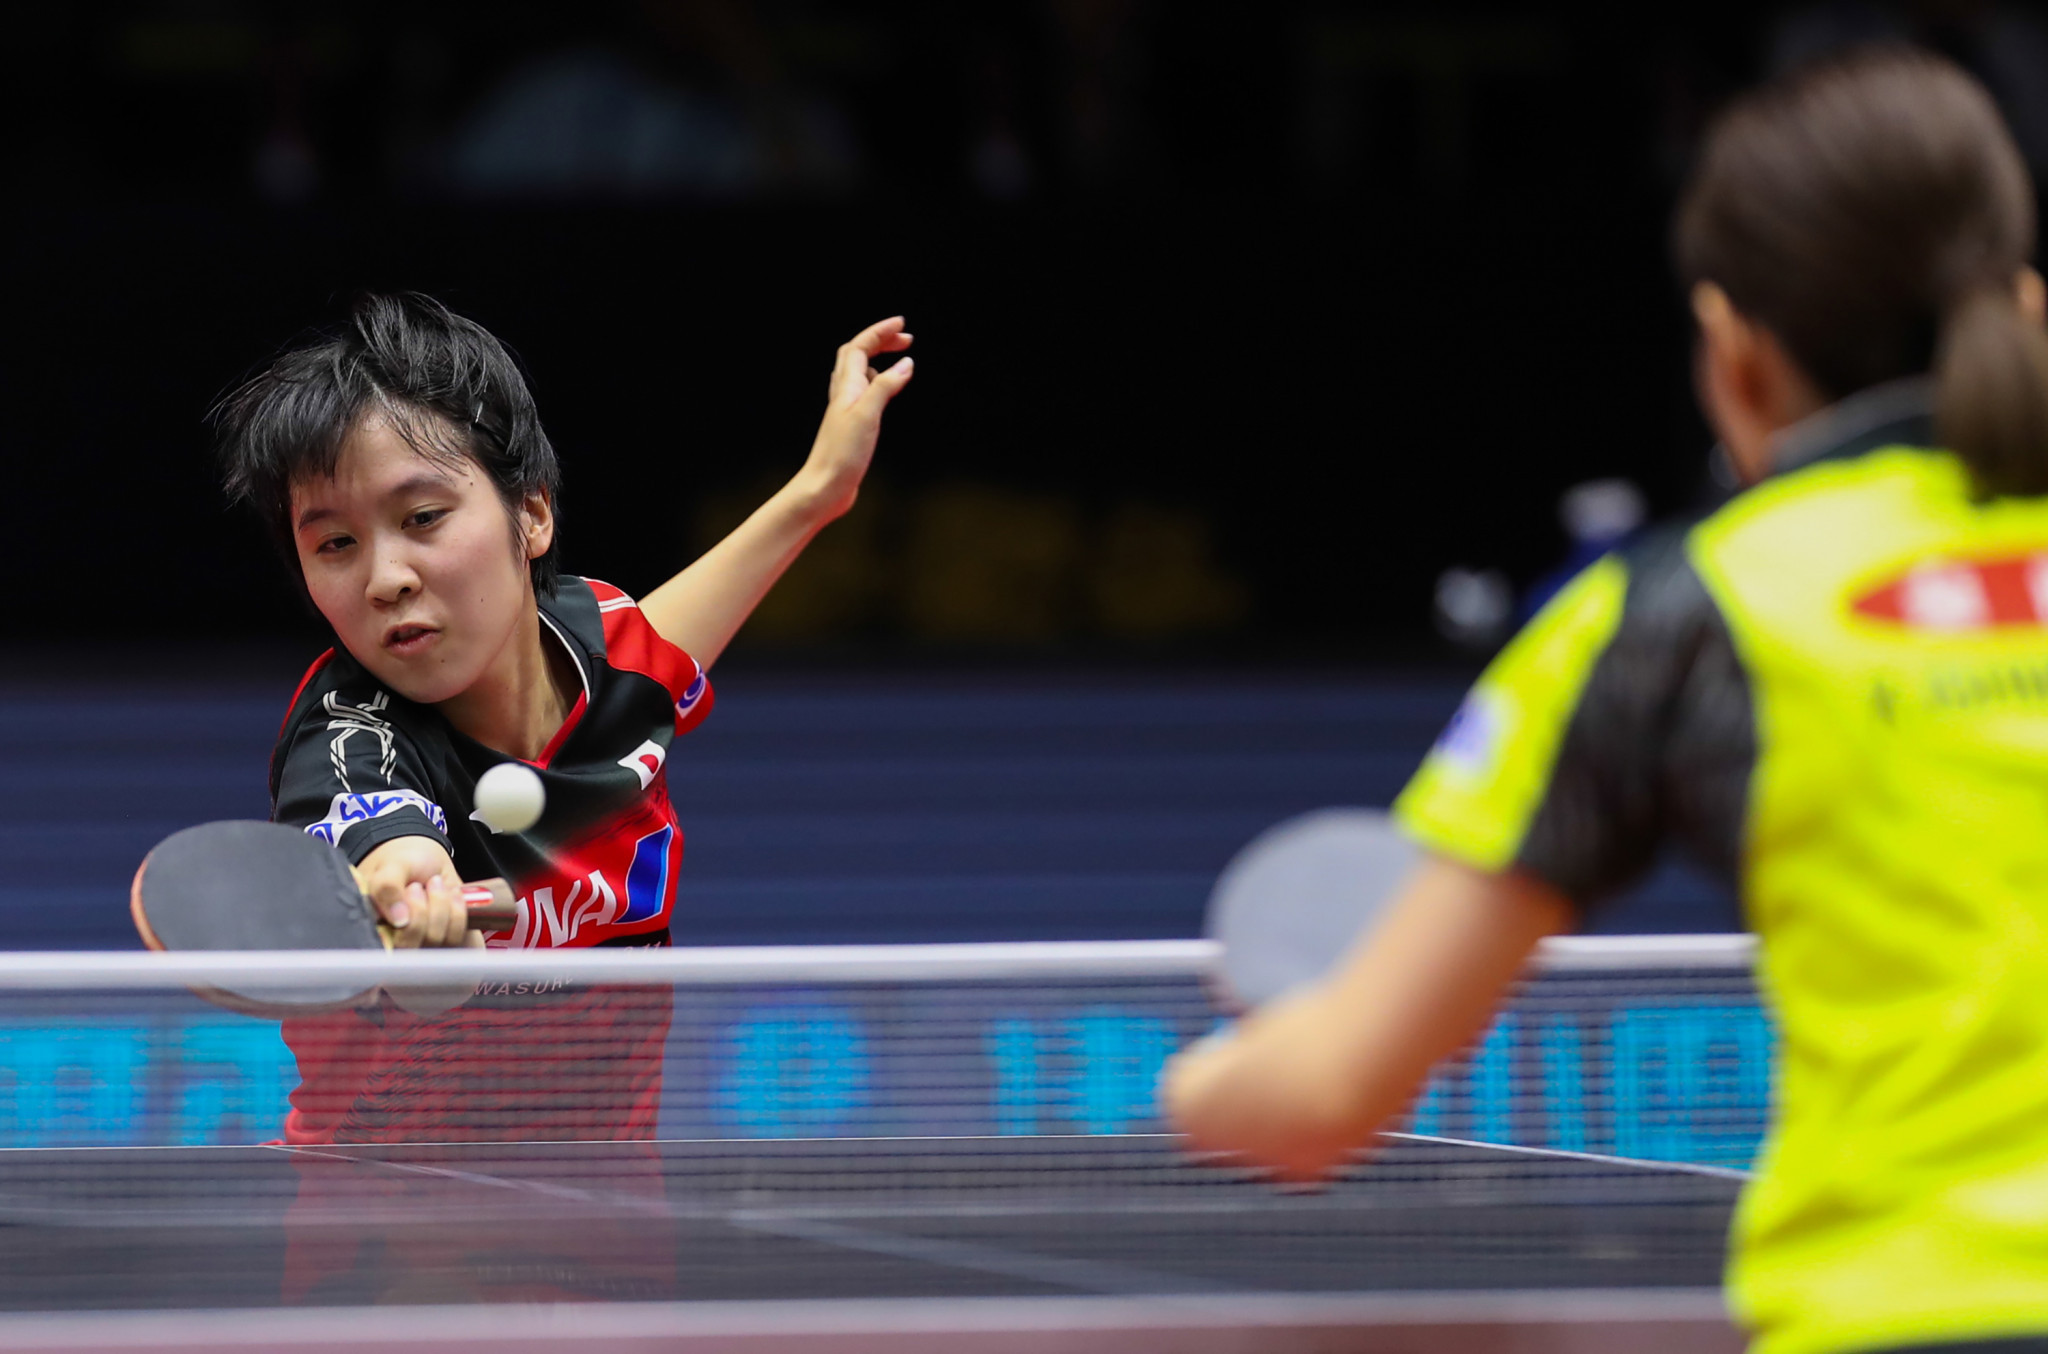 World Table Tennis has announced its events in the first half 2021 are set to take place in hubs in the Middle East, China and Europe ©Getty Images